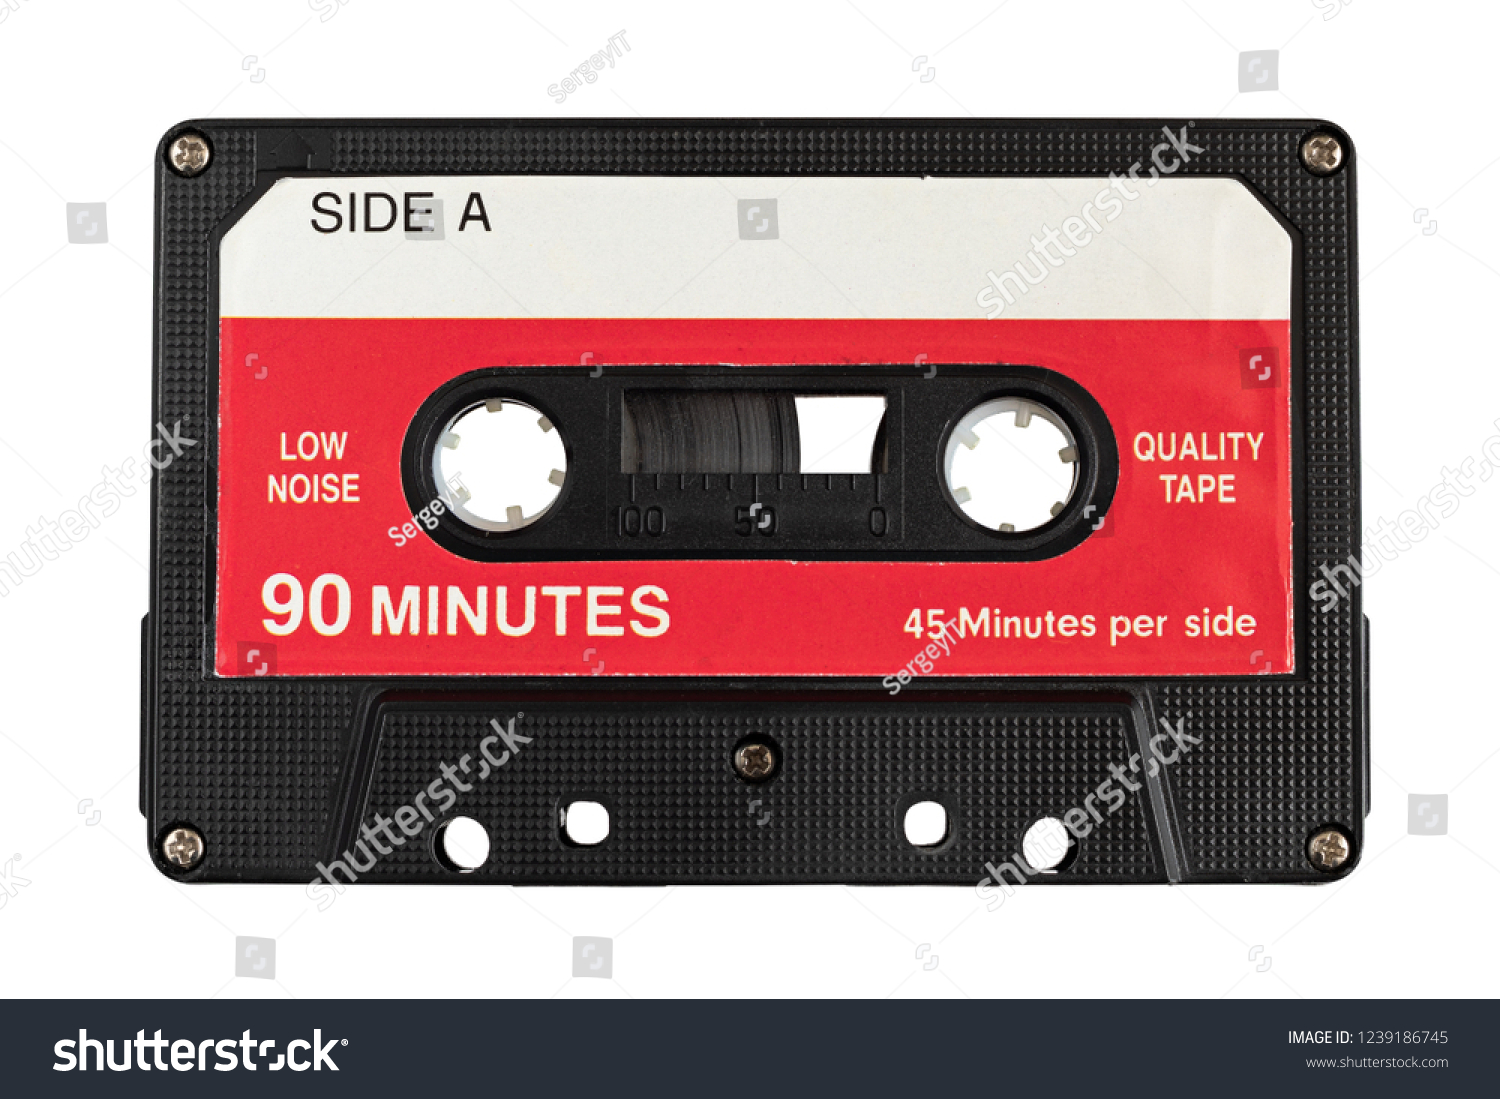 Audio cassette tape isolated, red and white colors #1239186745